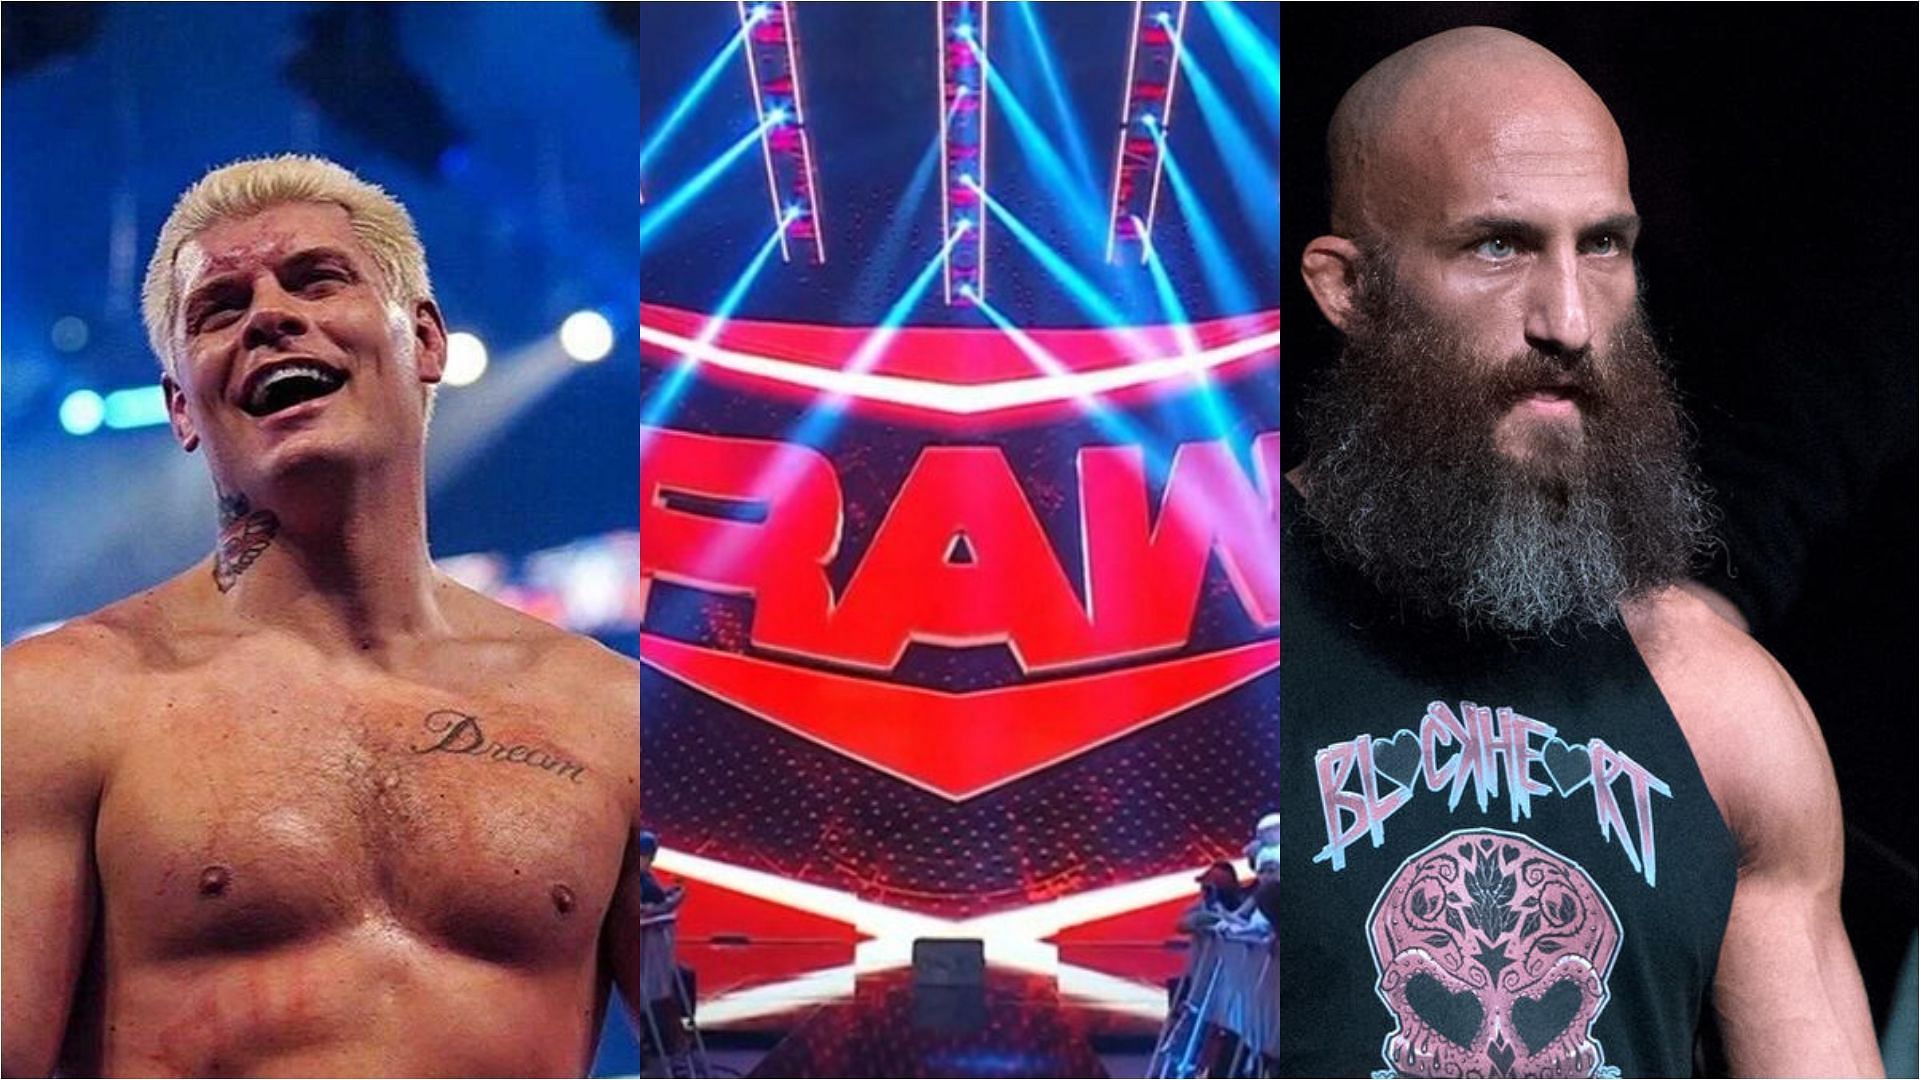 These WWE Superstars could spearhead a new-look Monday Night RAW